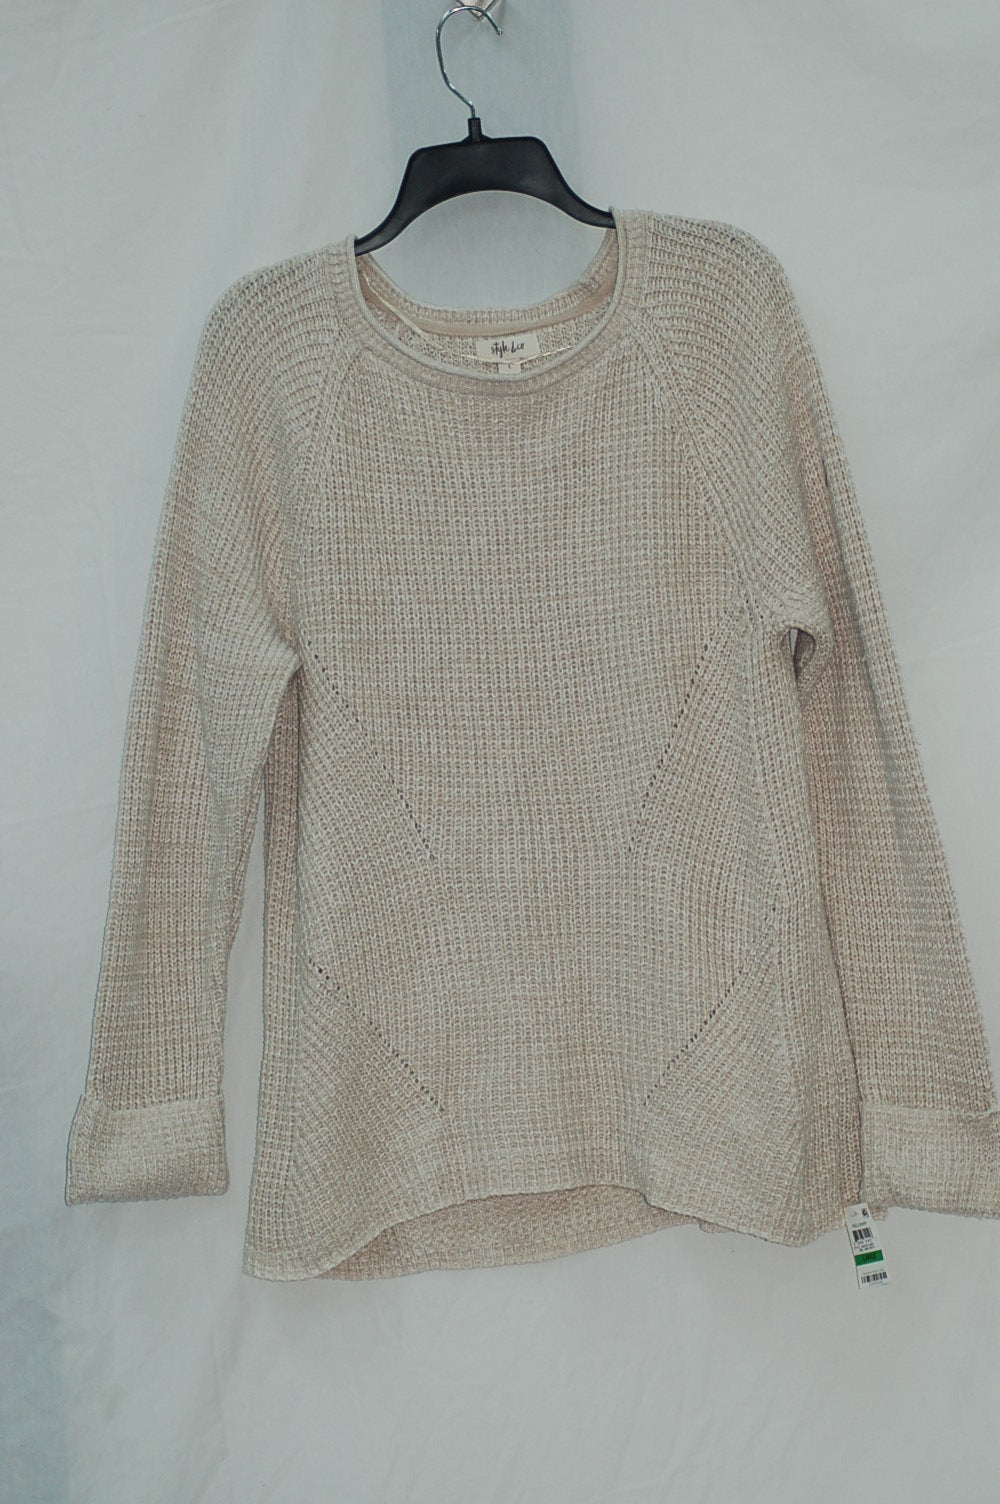 Style Co Scoop-Neck Marled Sweater Hammockwinter L